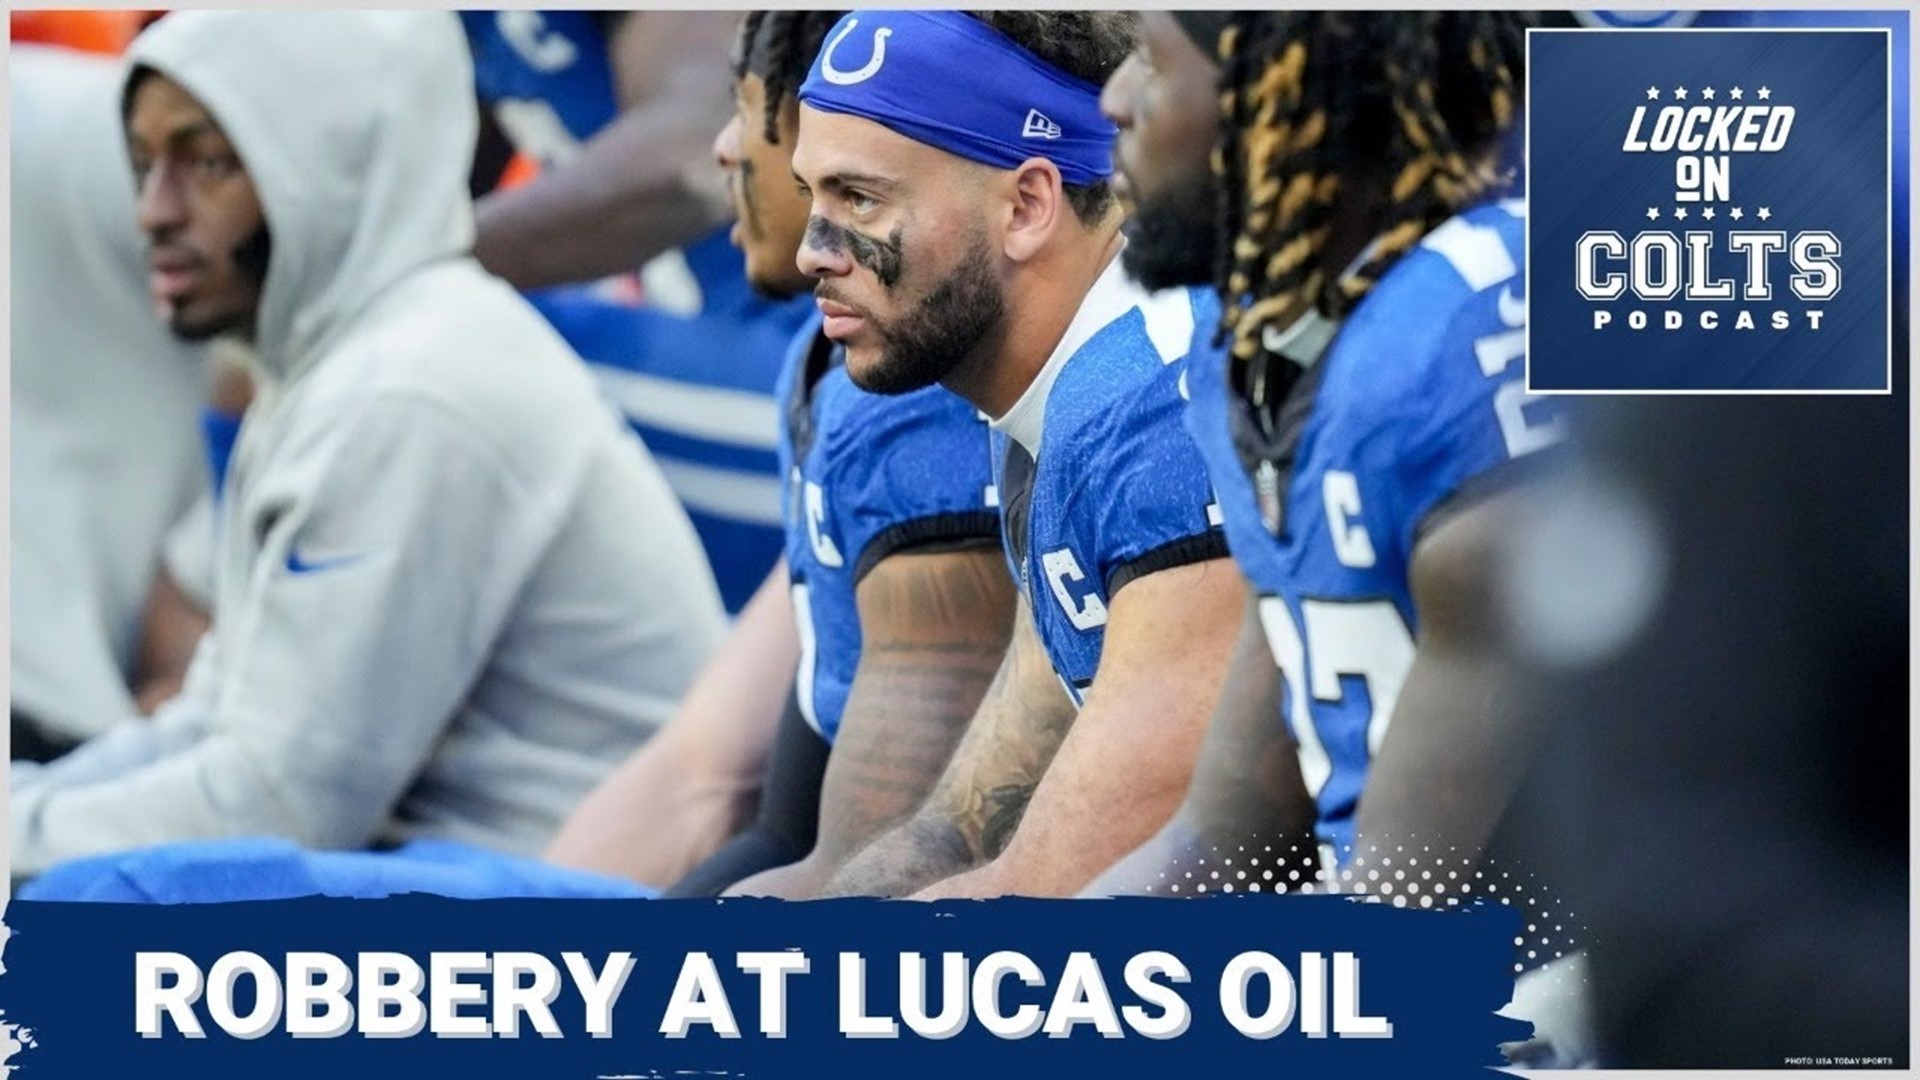 The Indianapolis Colts lost a back-and-forth game to the Cleveland Browns, 39-38, but the lasting impression is how the game was taken away from them.